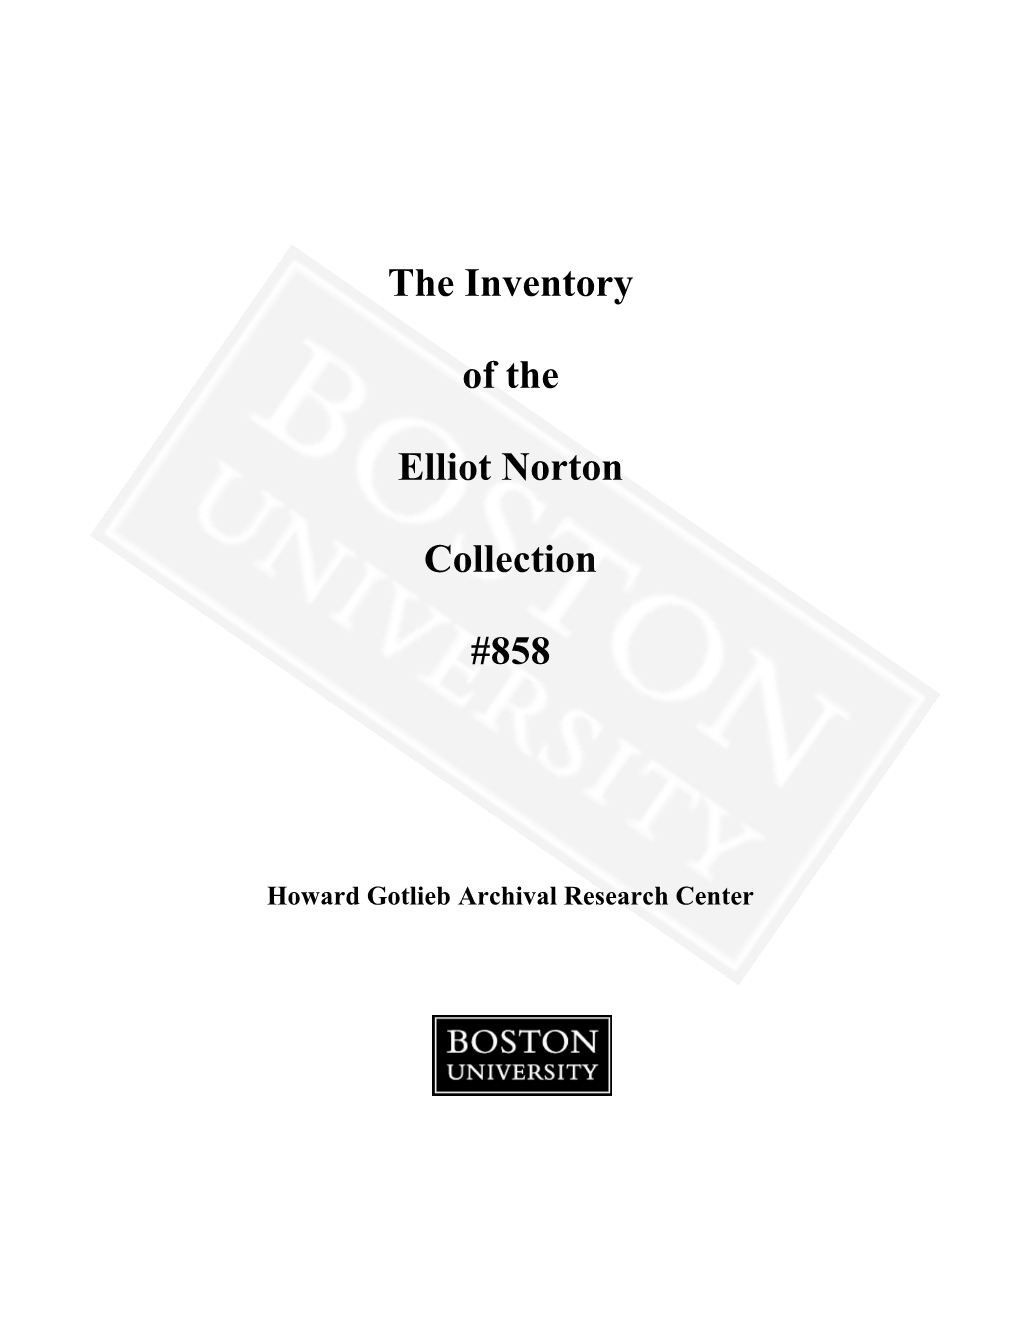 The Inventory of the Elliot Norton Collection #858